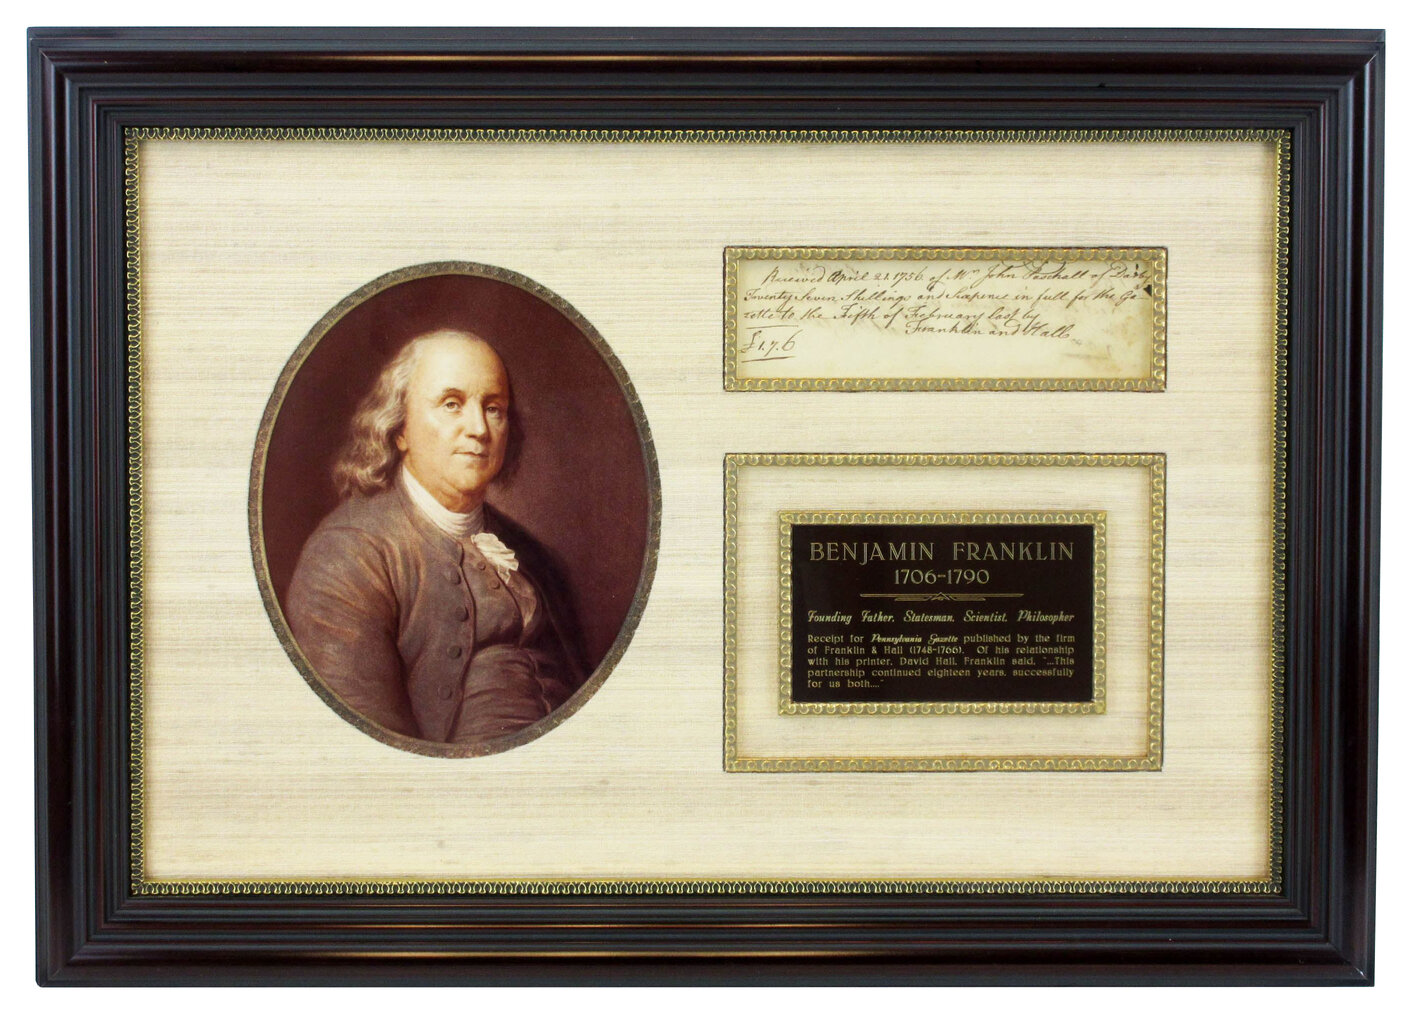 Benjamin Franklin engrossed and signed receipt from 1756 for his Pennsylvania Gazette newspaper, est. $9,000-$10,000